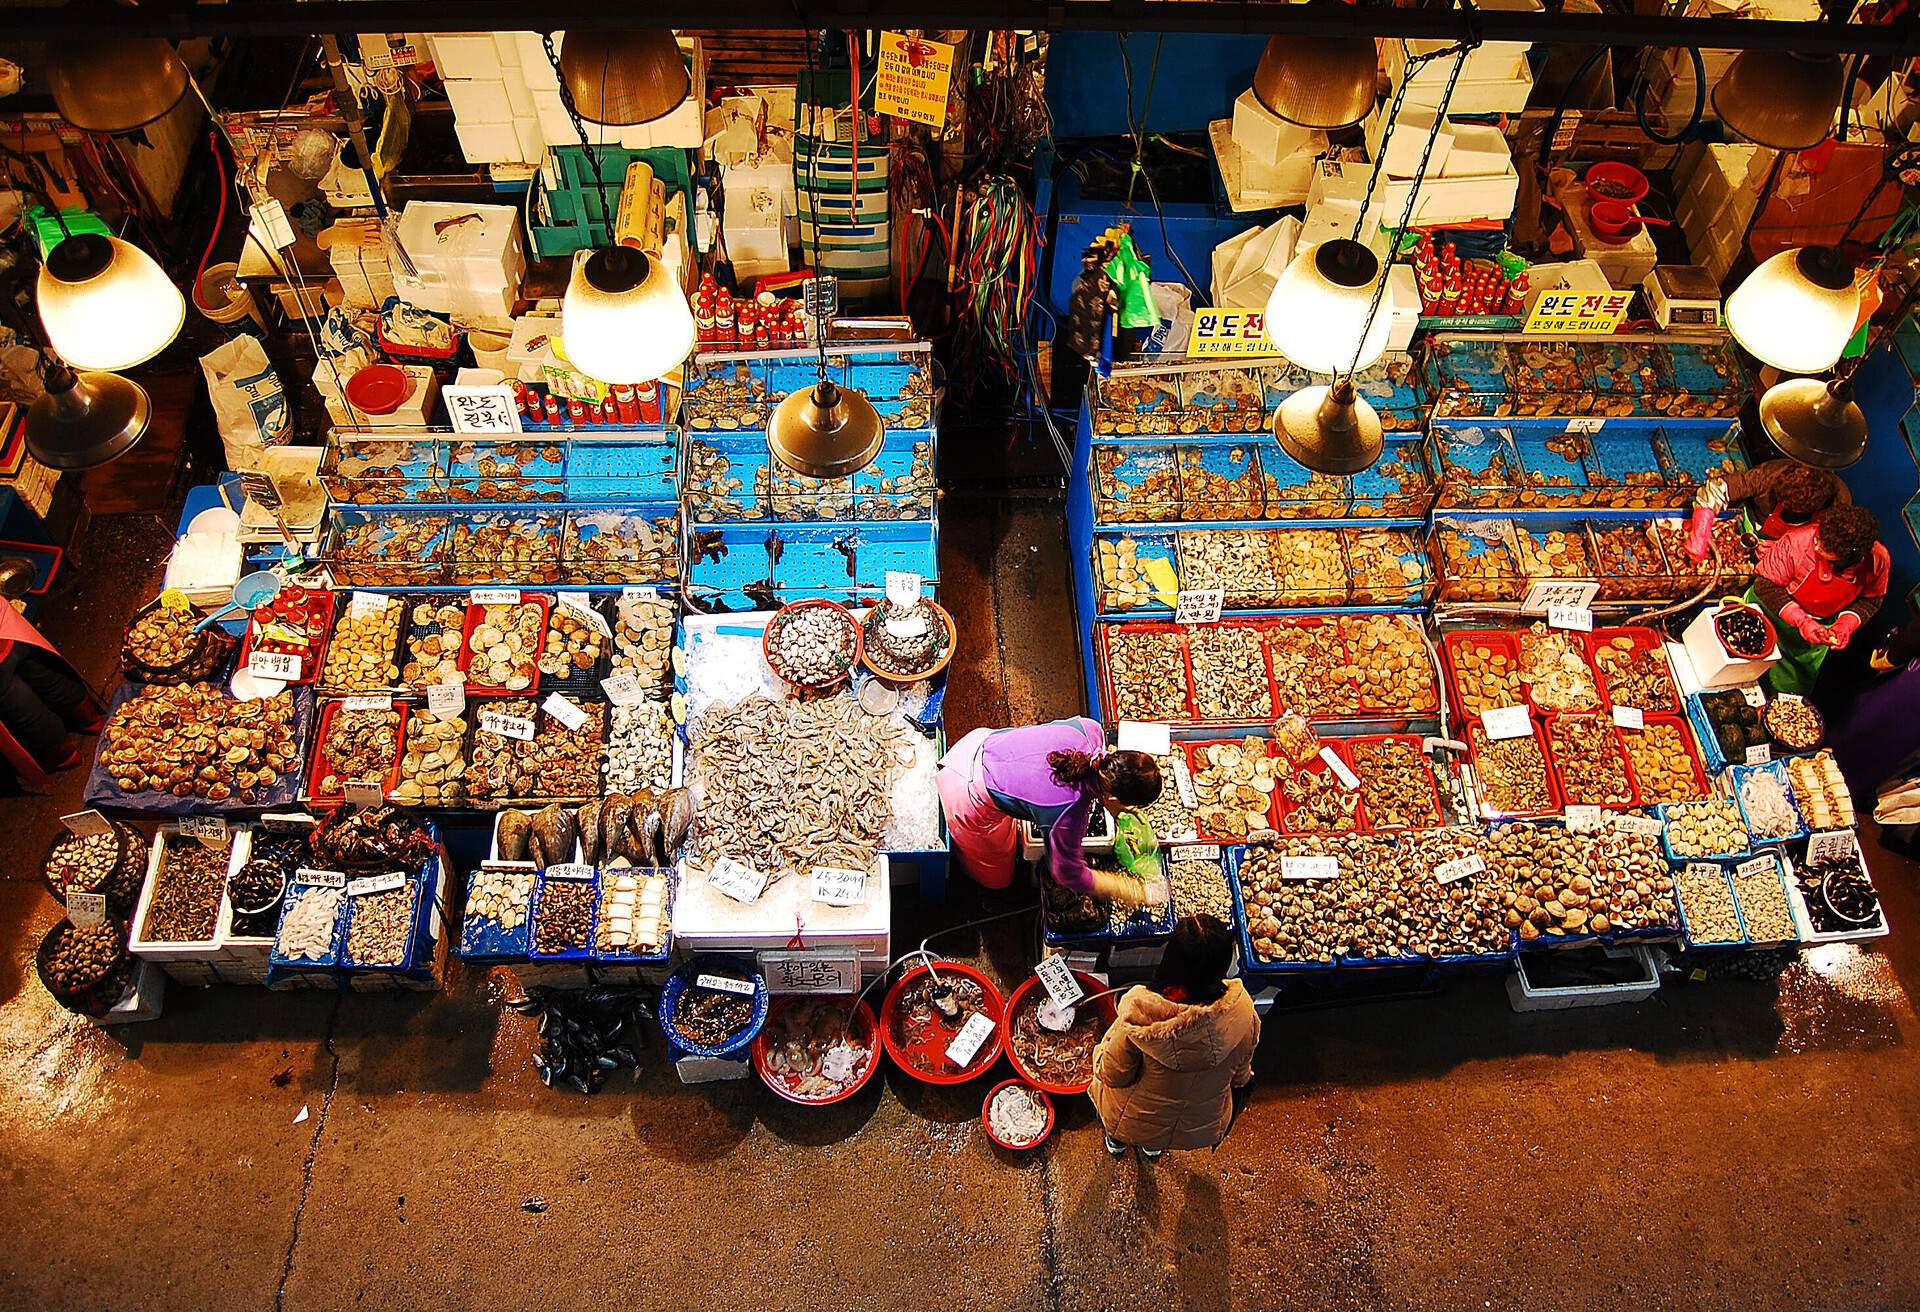 Overhead view of two stalls showcasing a variety of fresh seafood in a fish market.